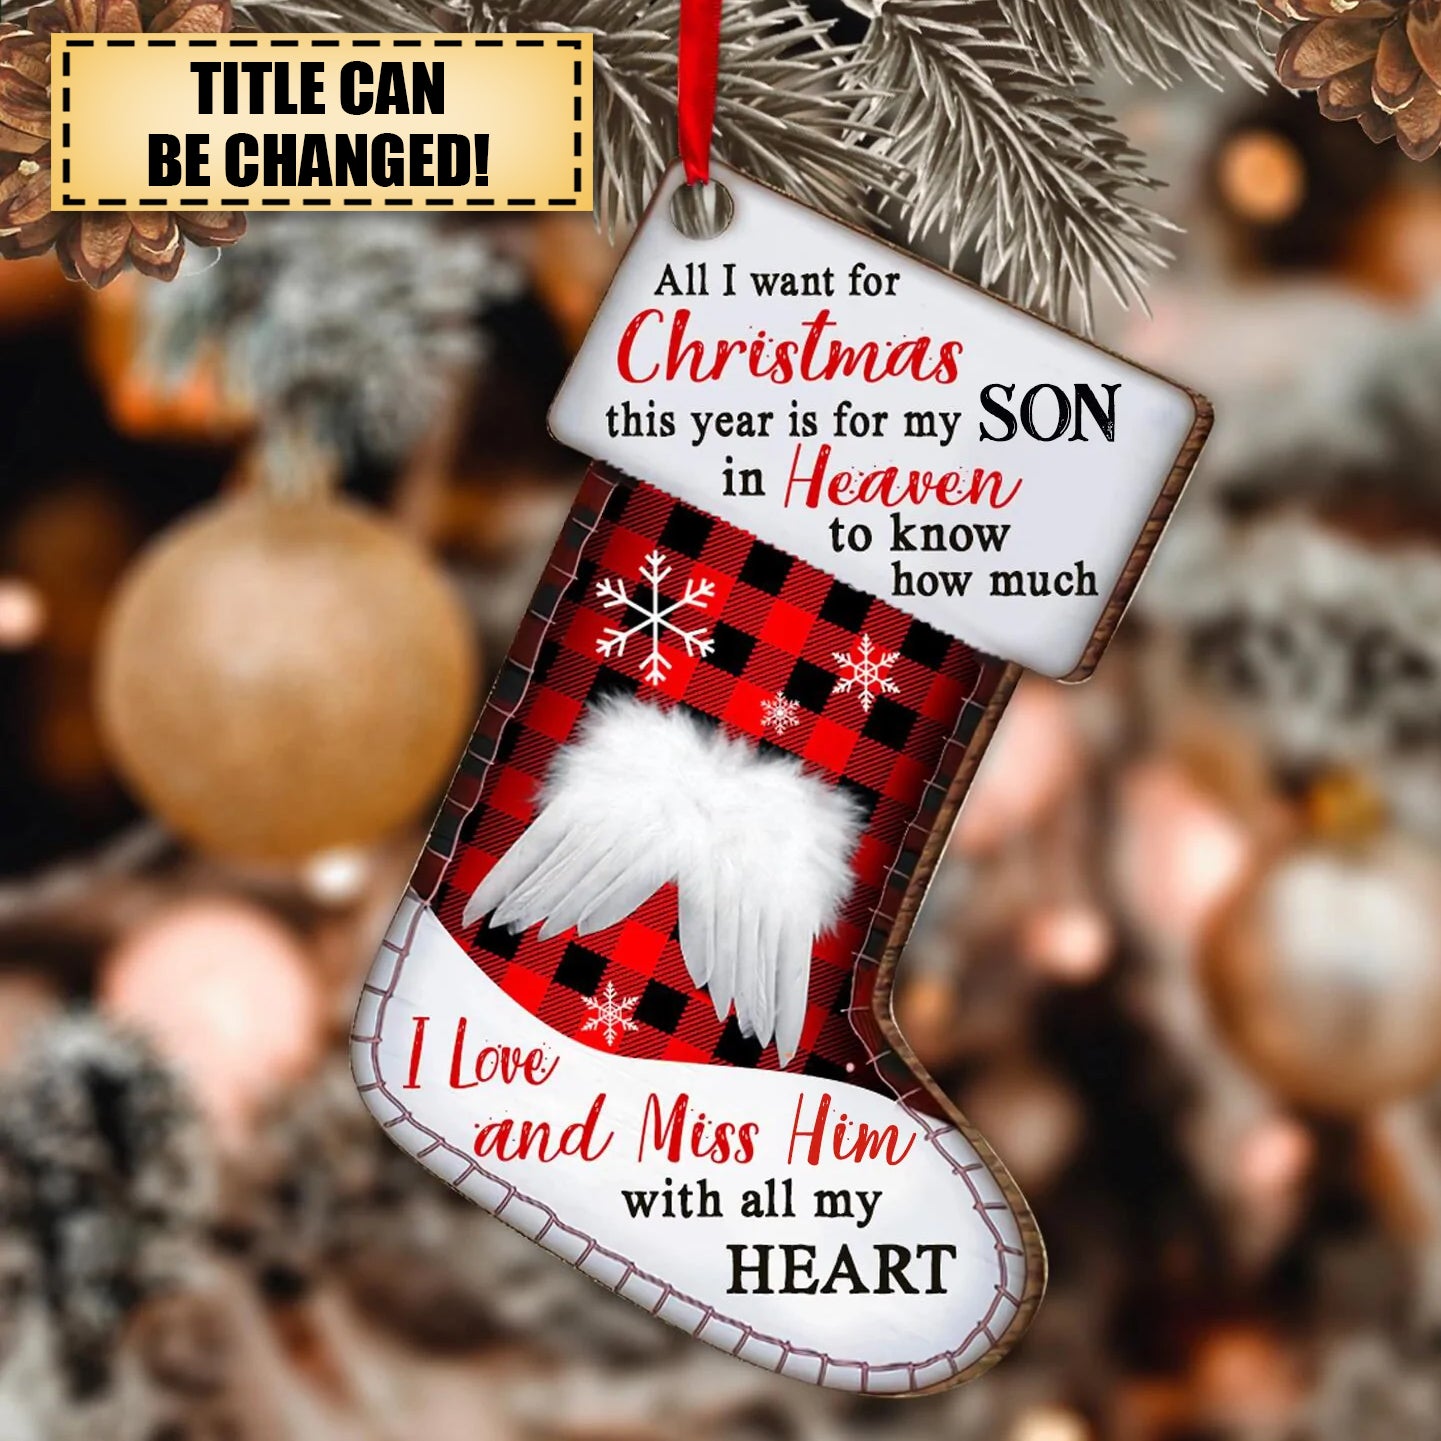 HOW MUCH I MISS YOU CHRISTMAS MEMORIAL PERSONALIZED ORNAMENT